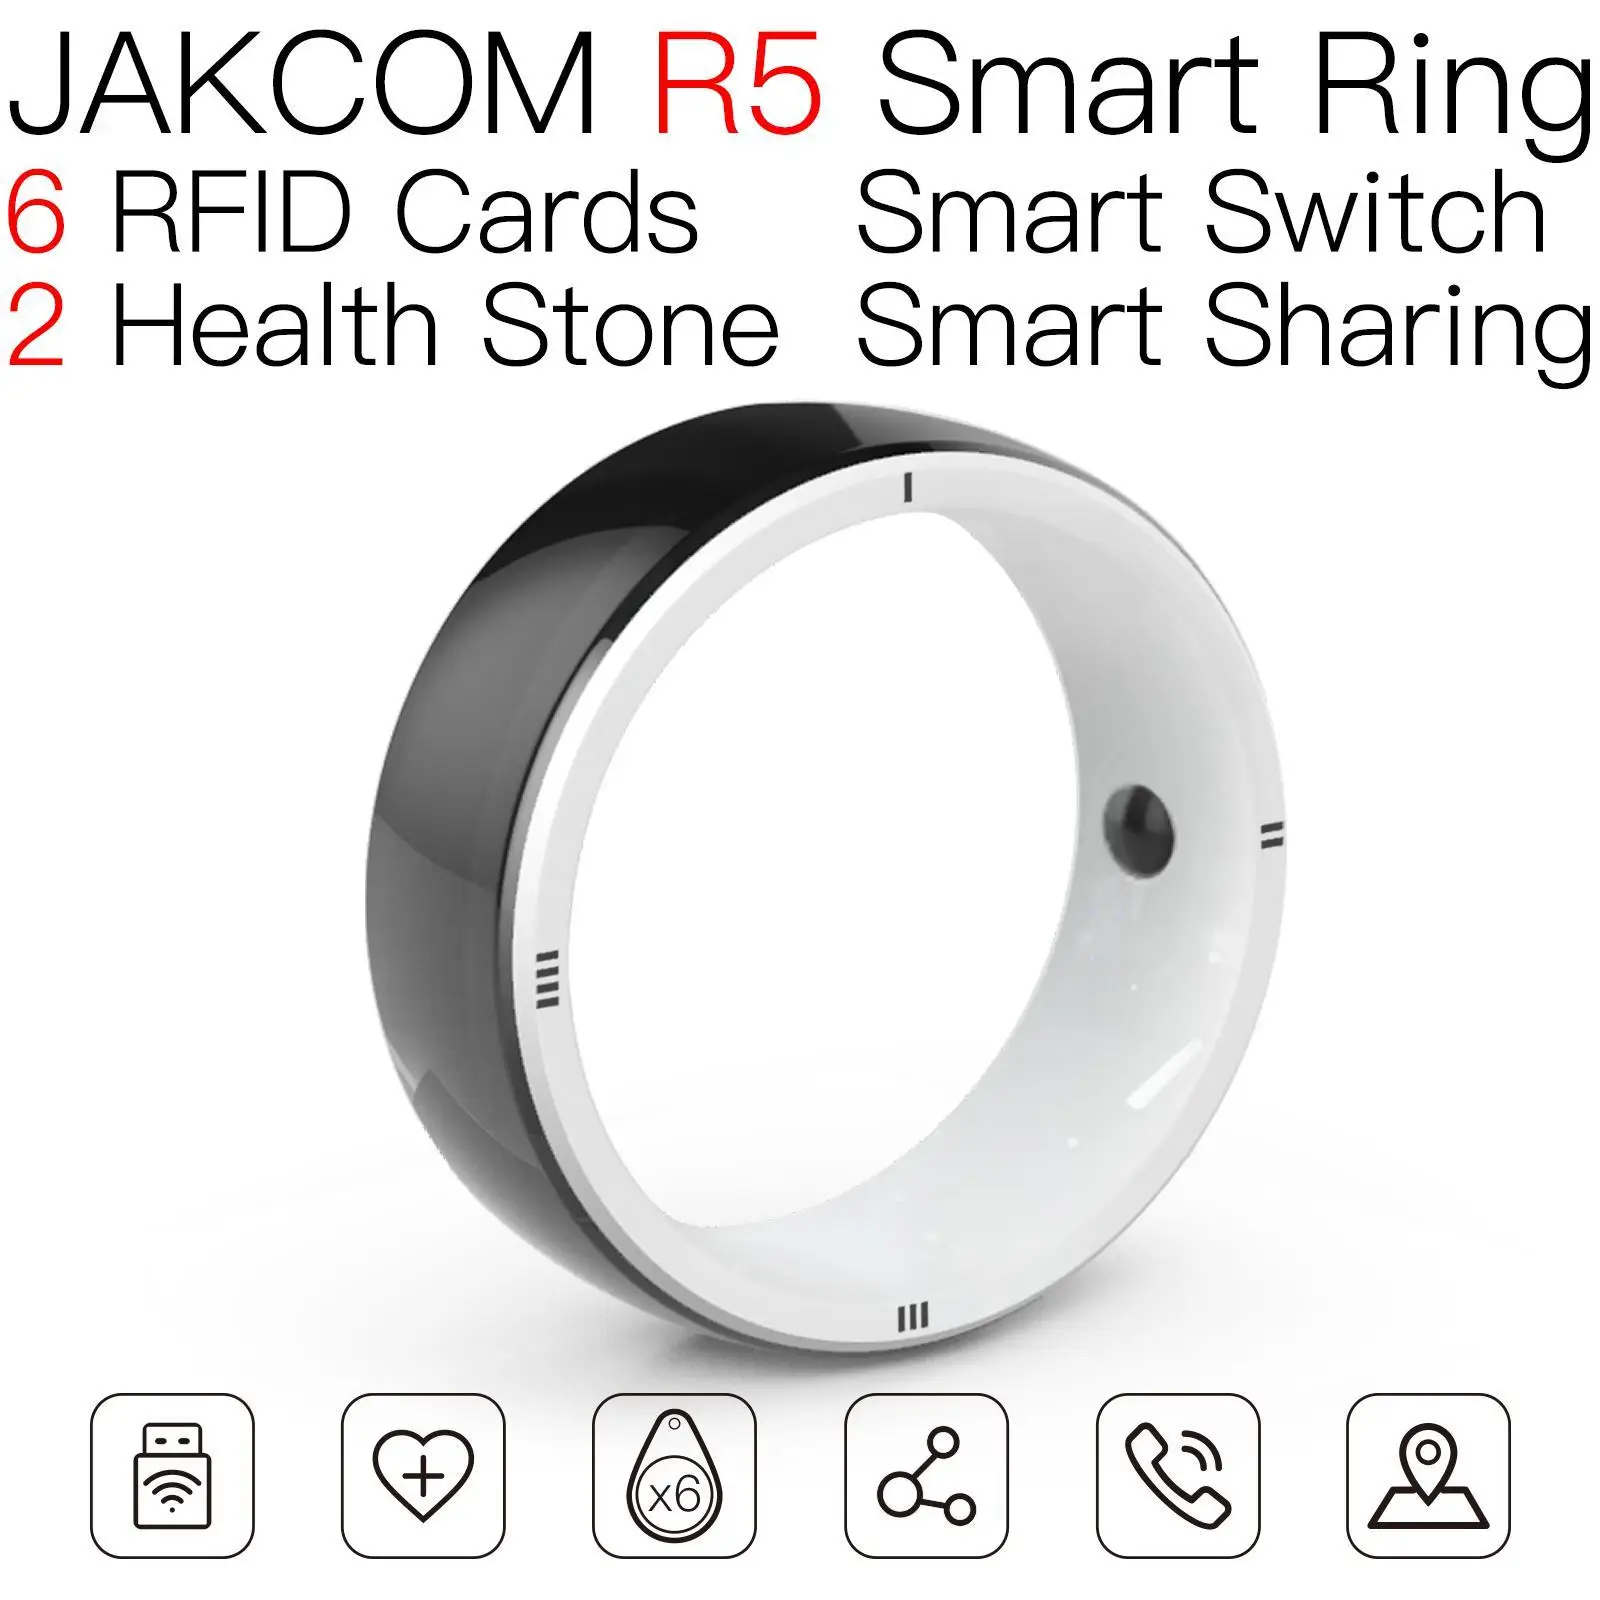 

JAKCOM R5 Smart Ring Super value as antiradiation protection cellular s2 anleon oracle cards programmer nfc pvc chip card